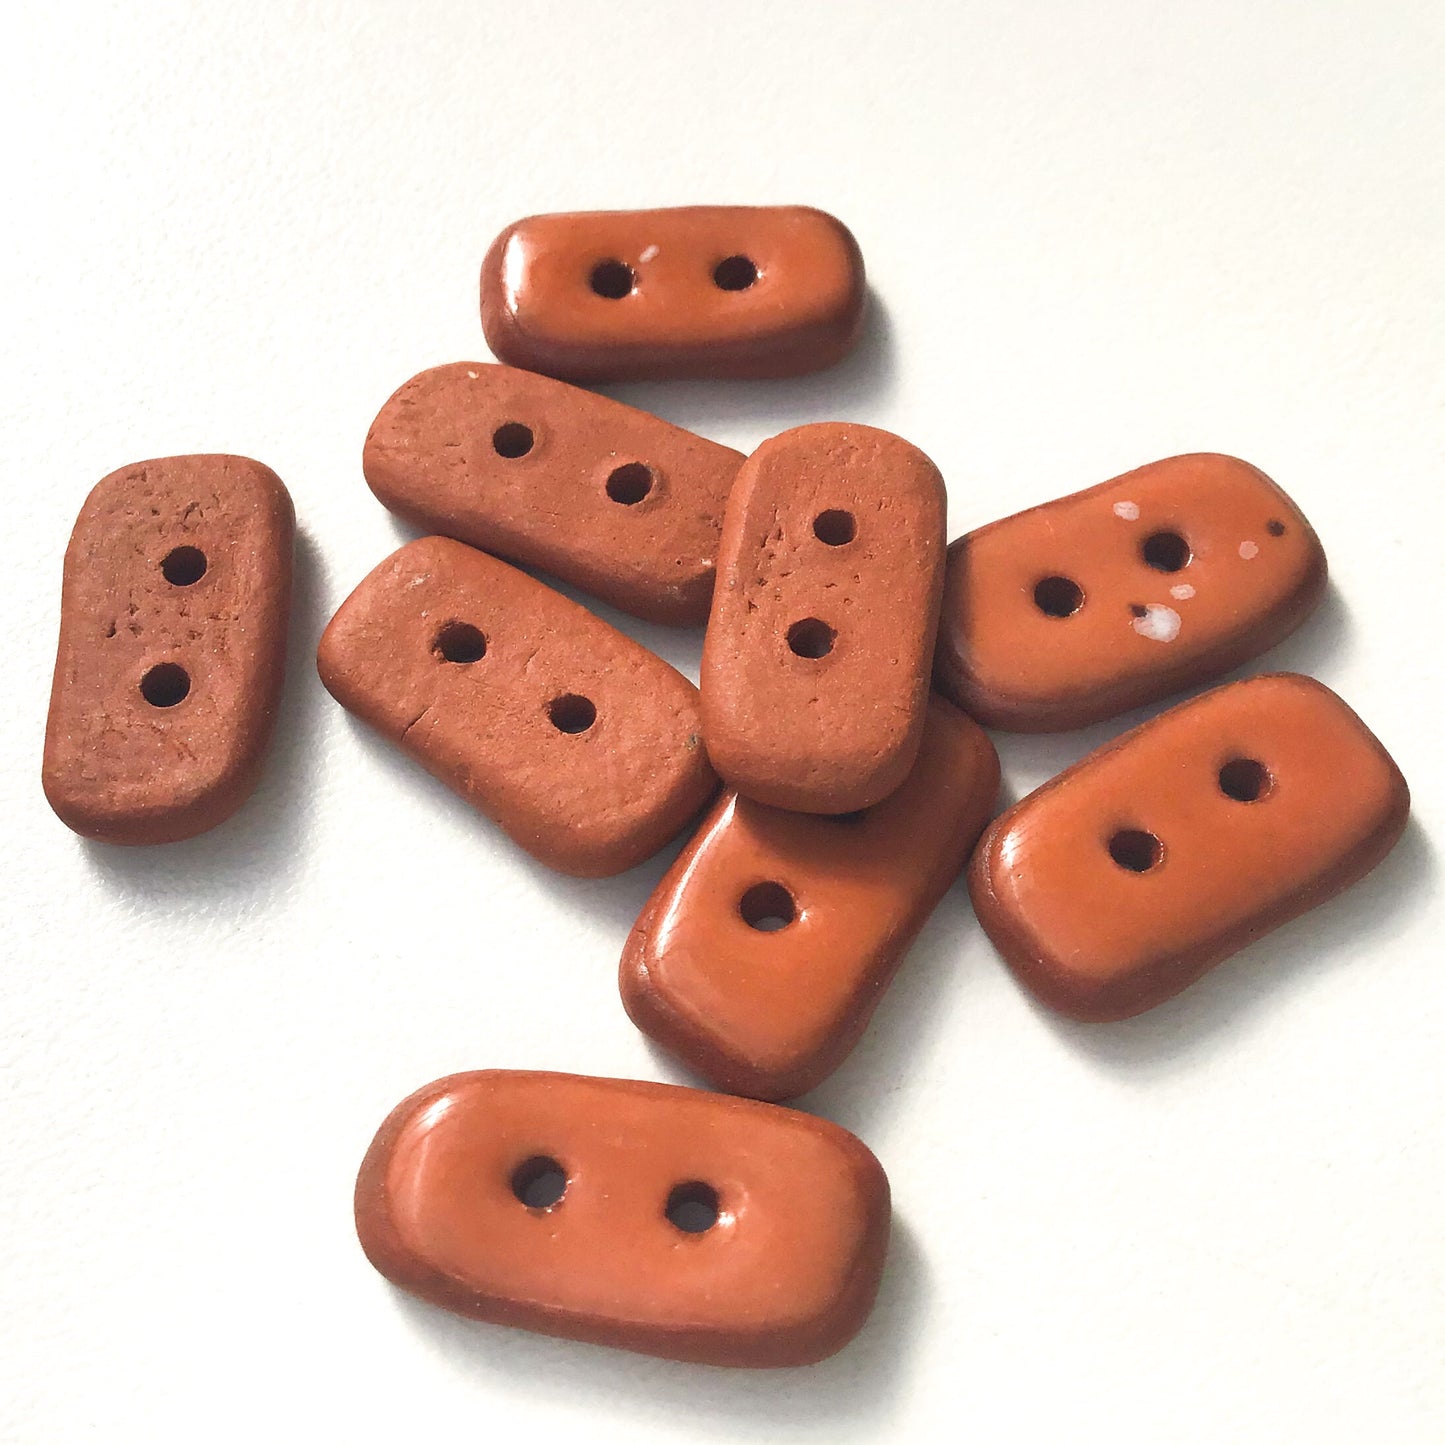 Rust Colored Ceramic Buttons - Small Retangular Clay Buttons - 3/8" x 3/4" - 9 Pack